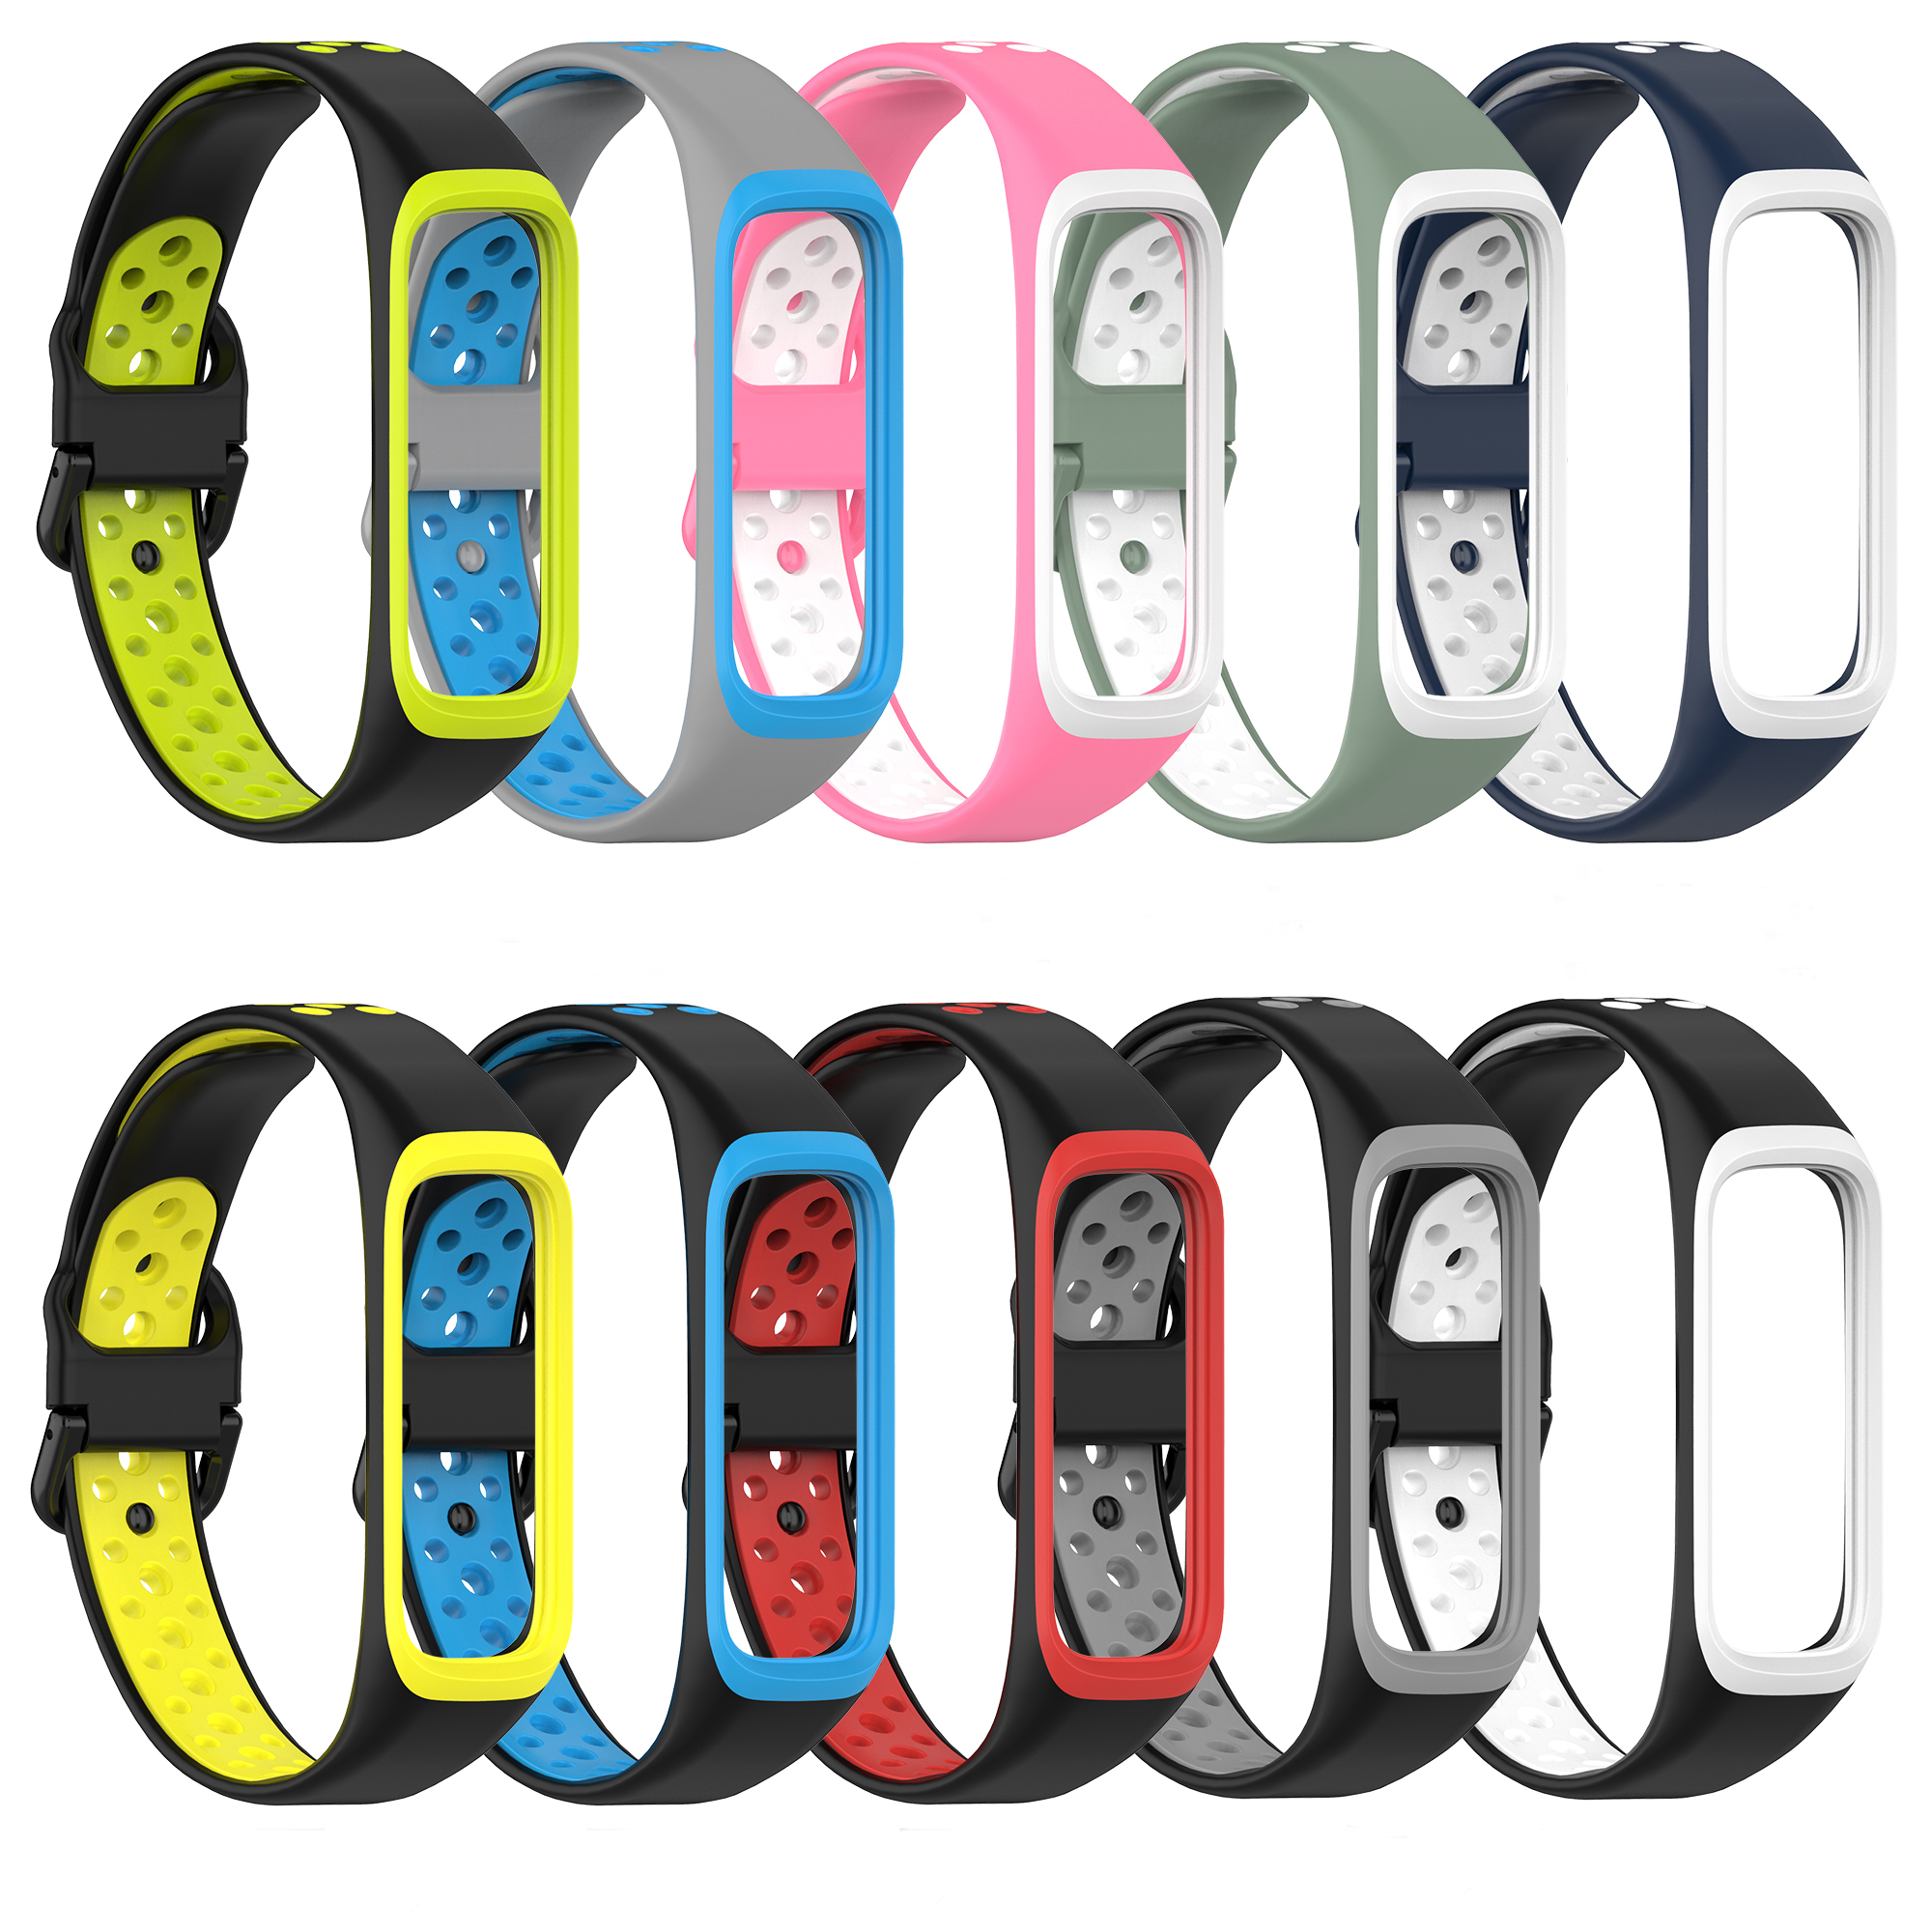 Bakeey-Rubber-Two-color-Replacement-Strap-Smart-Watch-Band-For-Samsung-Galaxy-Fit-2-1806558-2